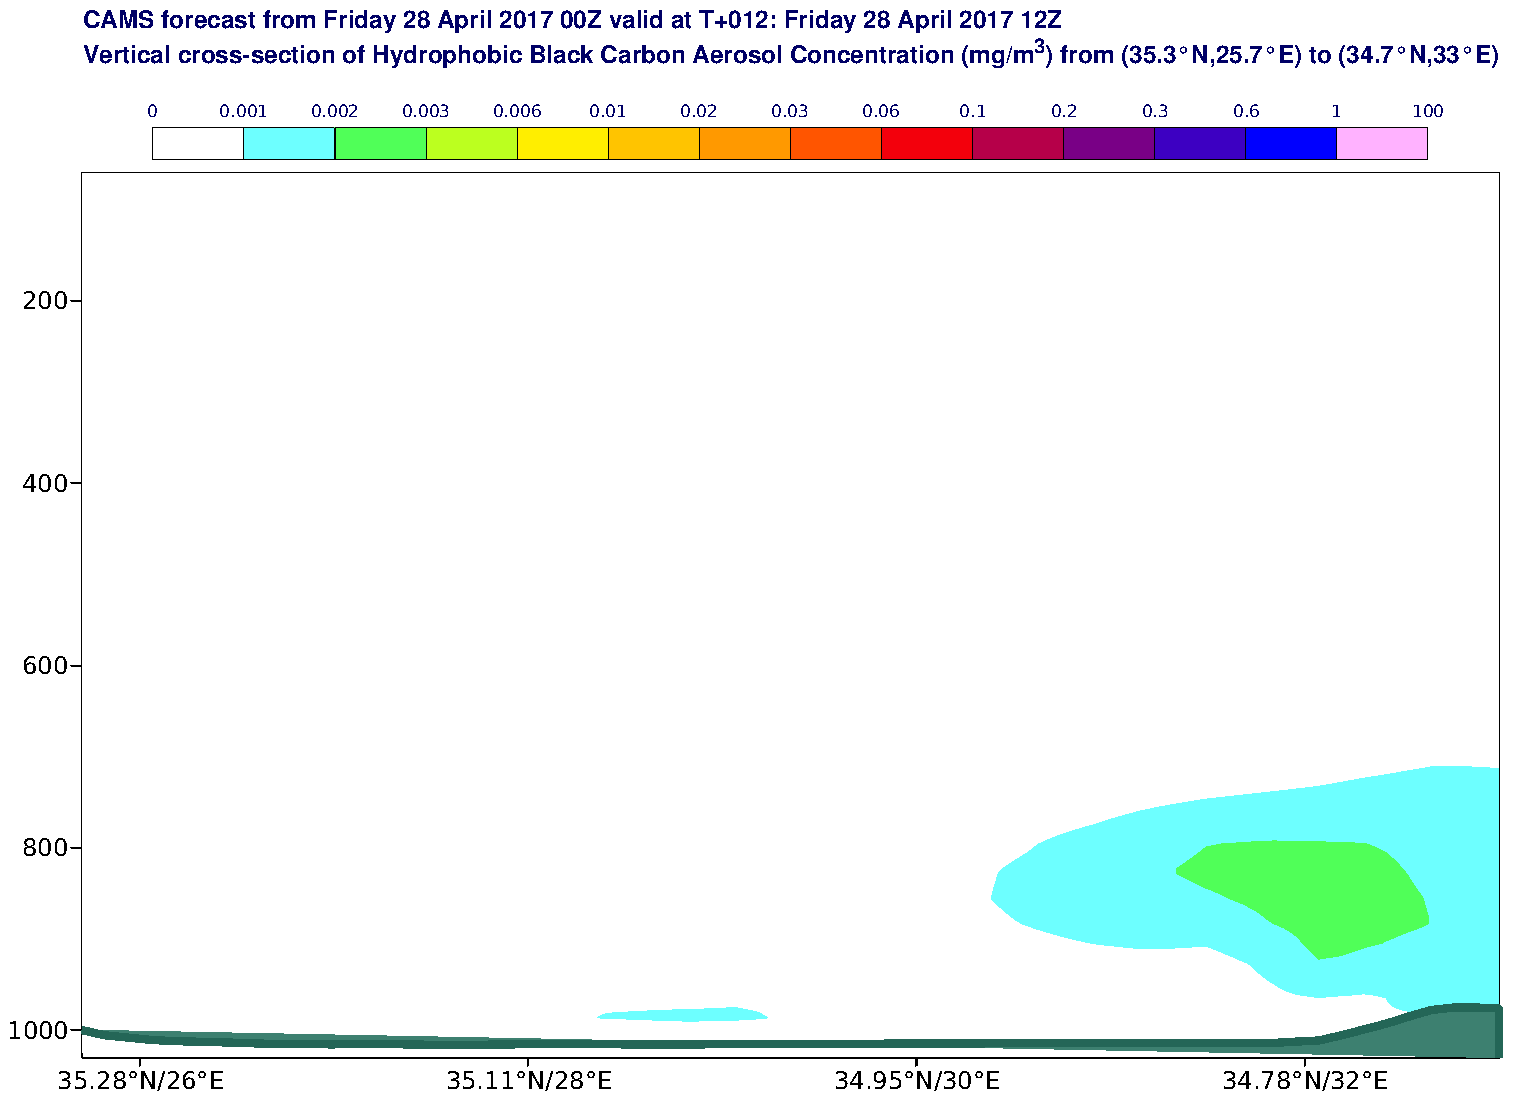 Vertical cross-section of Hydrophobic Black Carbon Aerosol Concentration (mg/m3) valid at T12 - 2017-04-28 12:00